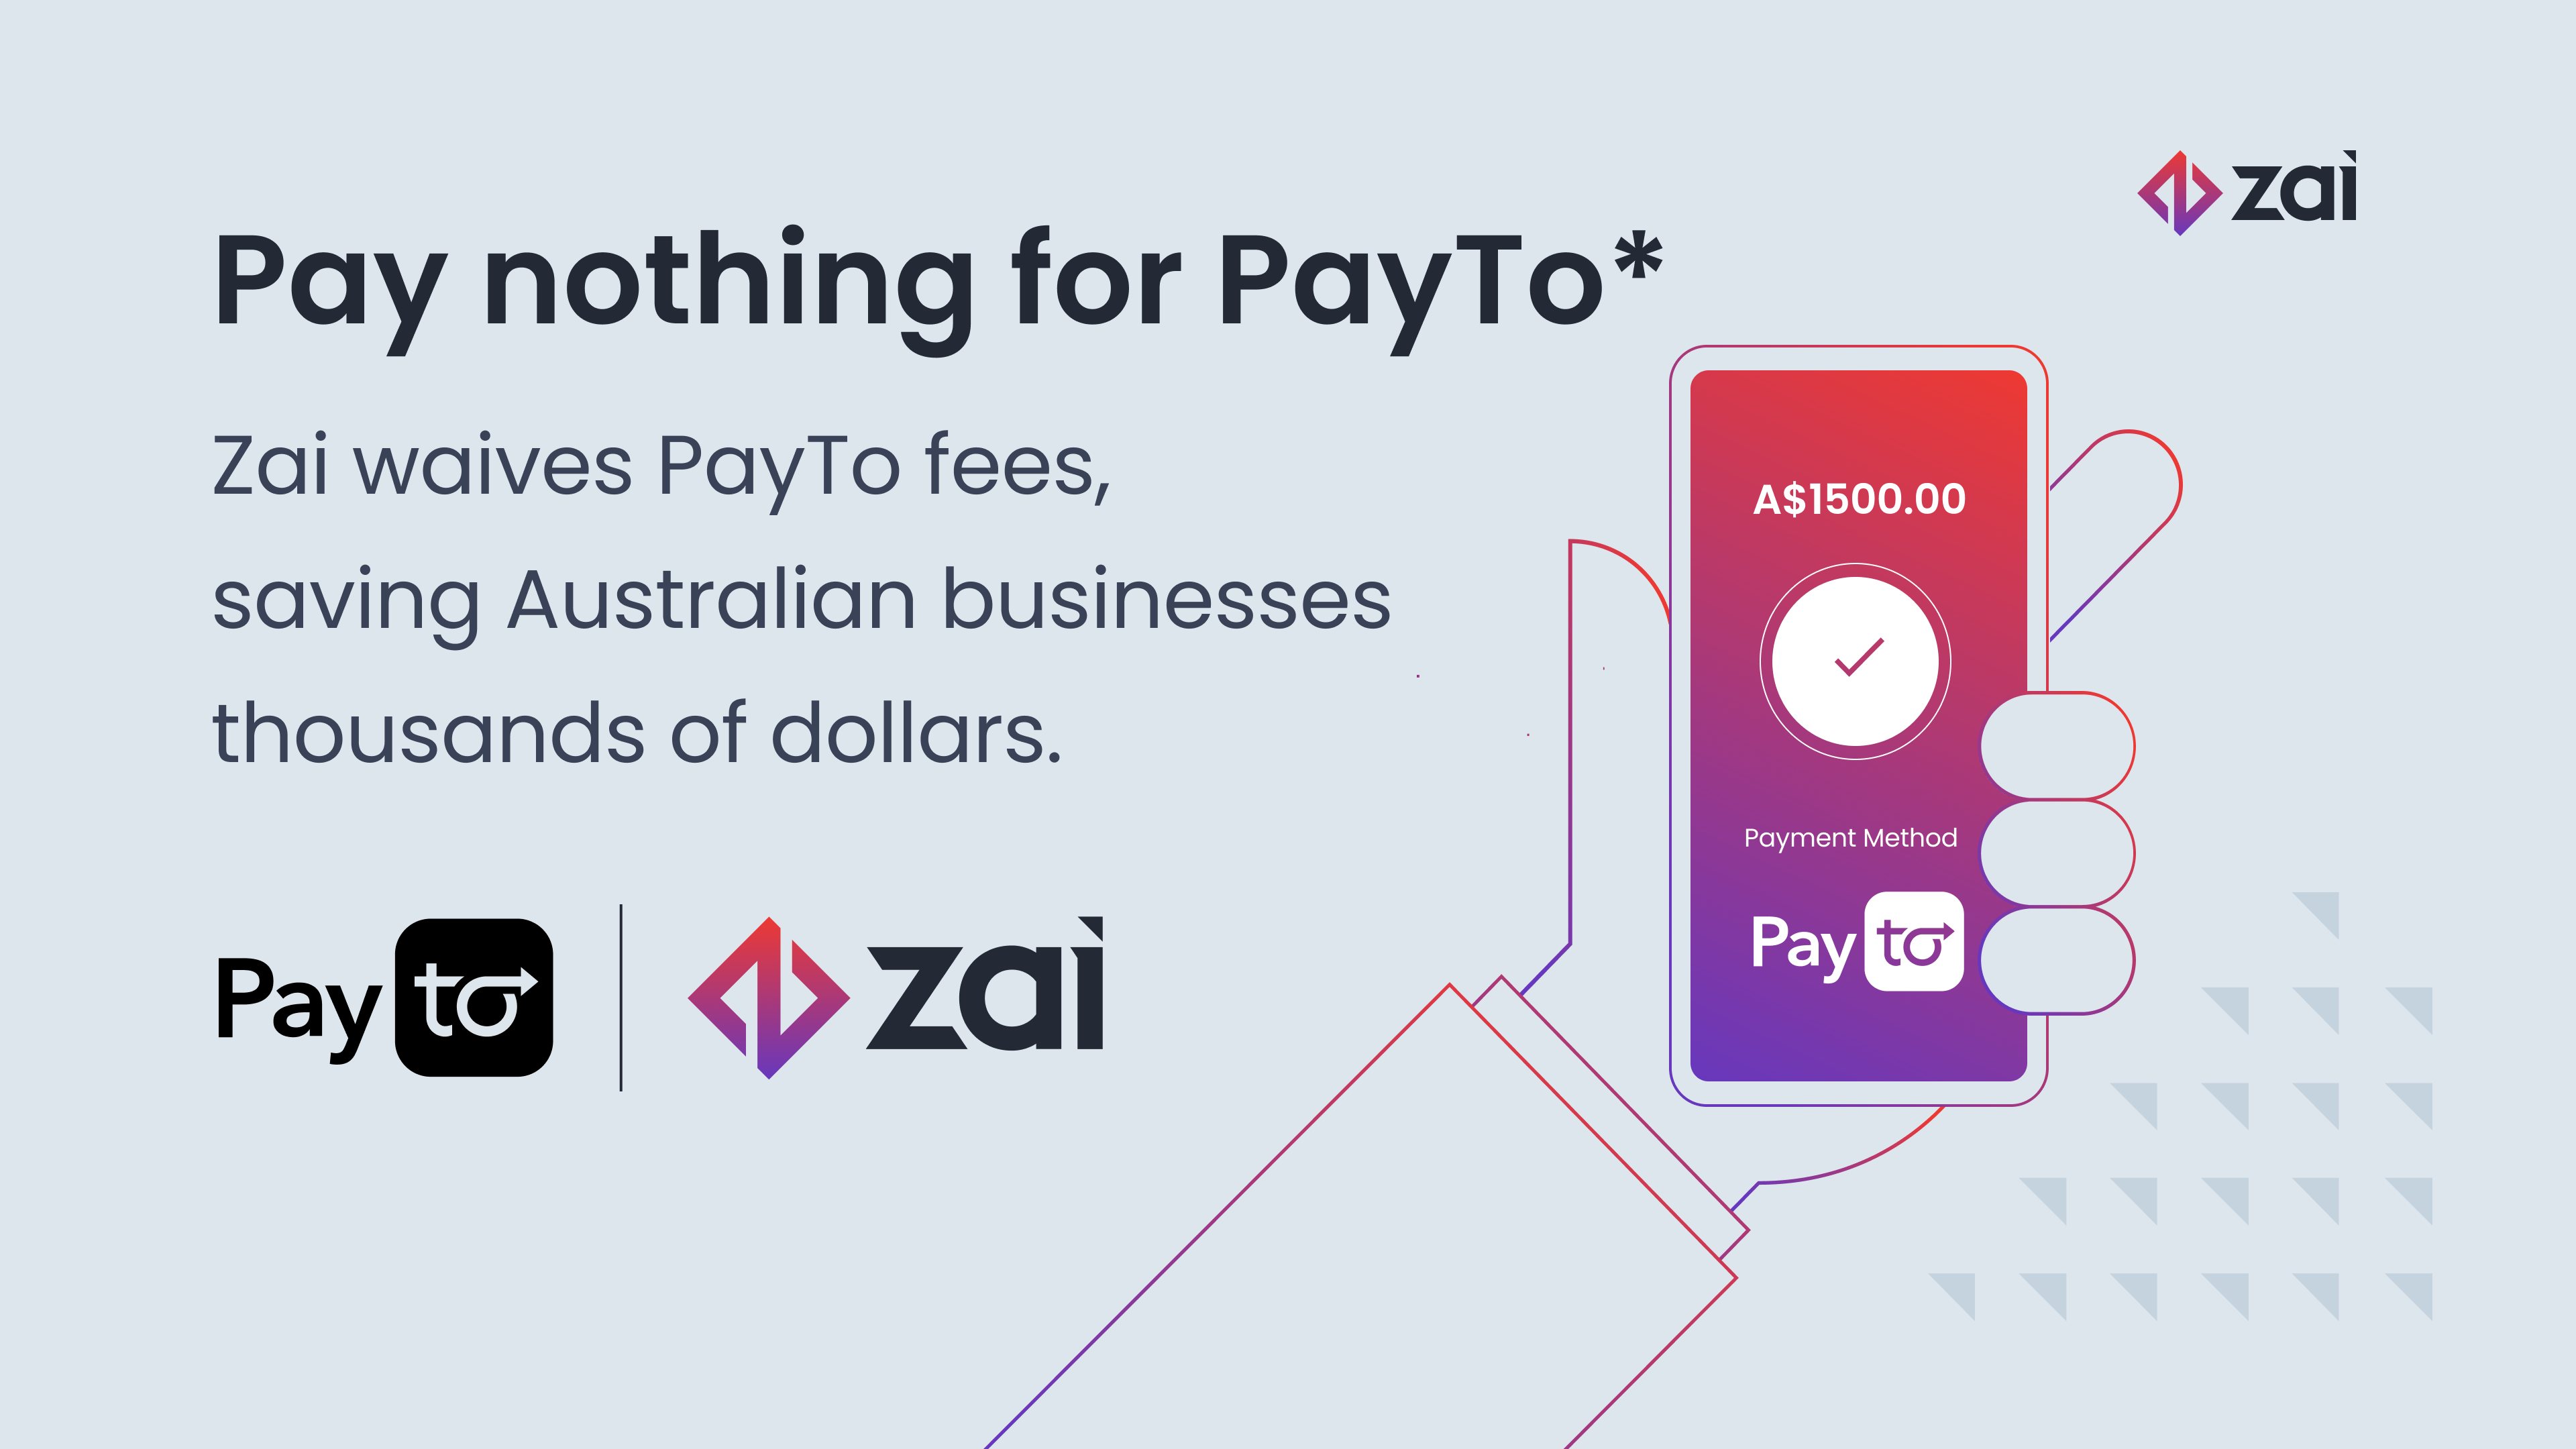 Zai waives PayTo fees for new and existing customers